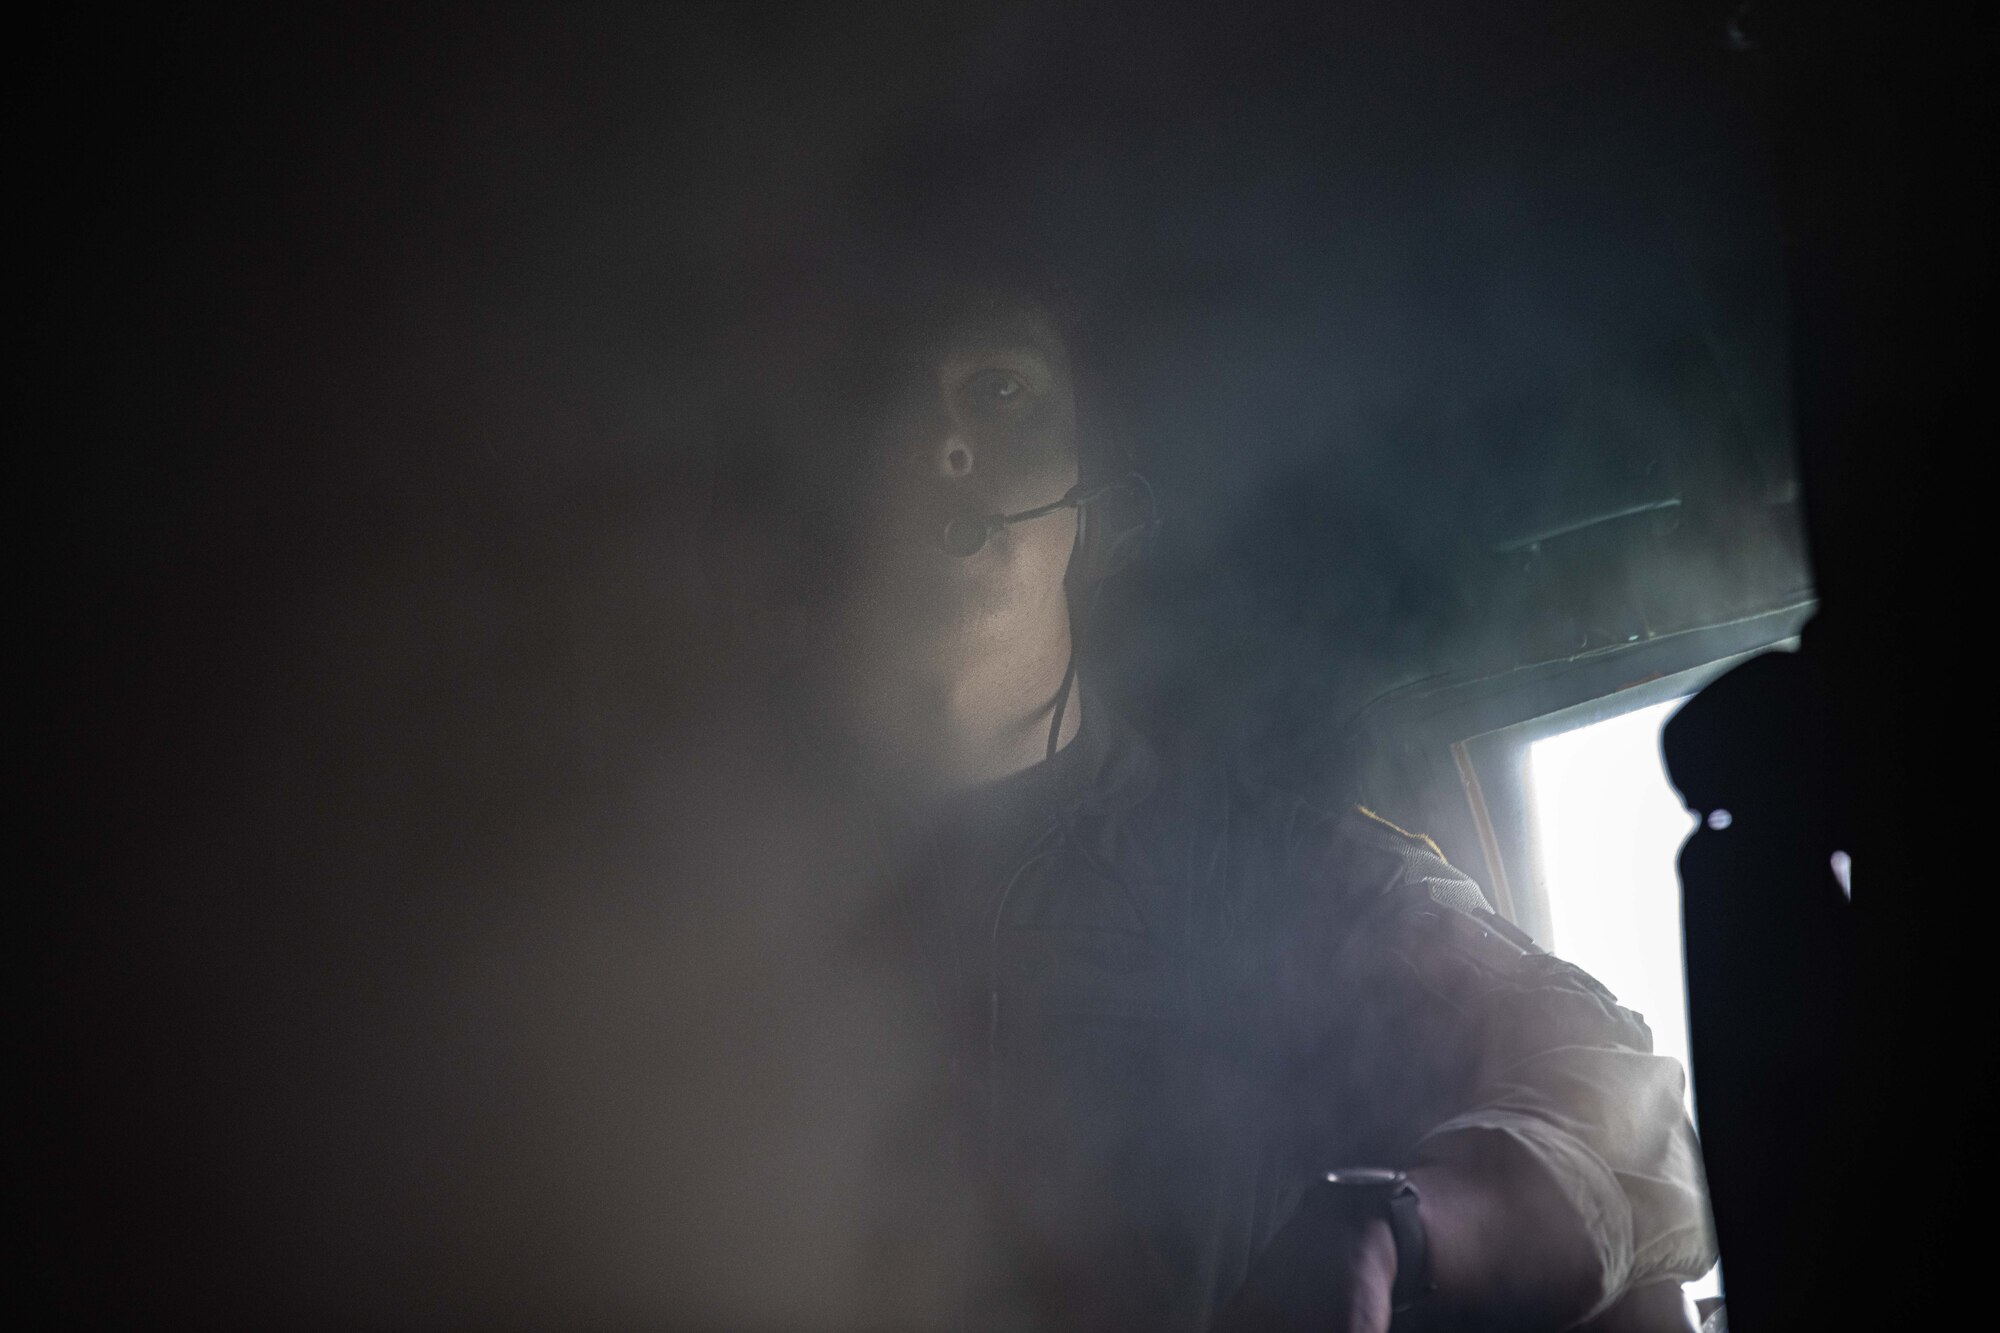 A member of the flight crew stares at the camera through the thick water vapor billowing in the cabin.